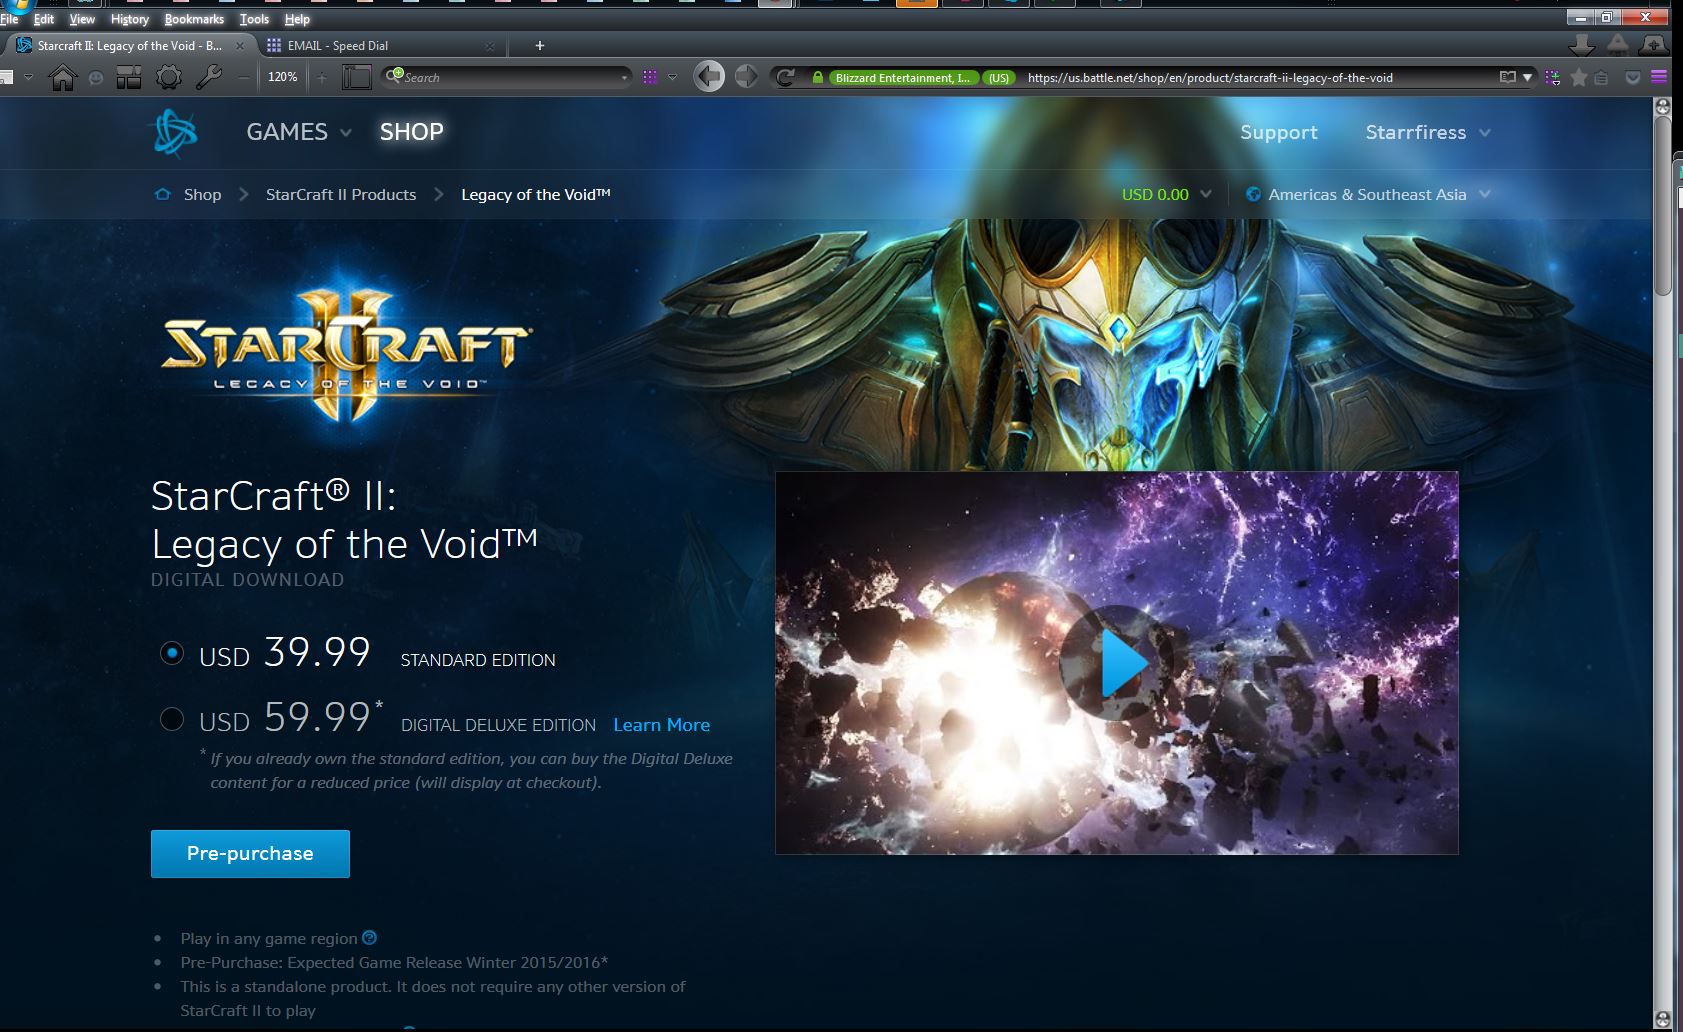 Voices of the void как работать. Старкрафт Legacy of the Void. STARCRAFT 2 Legacy og the Void. STARCRAFT 2 Deluxe Edition. STARCRAFT II Legacy of the Void.